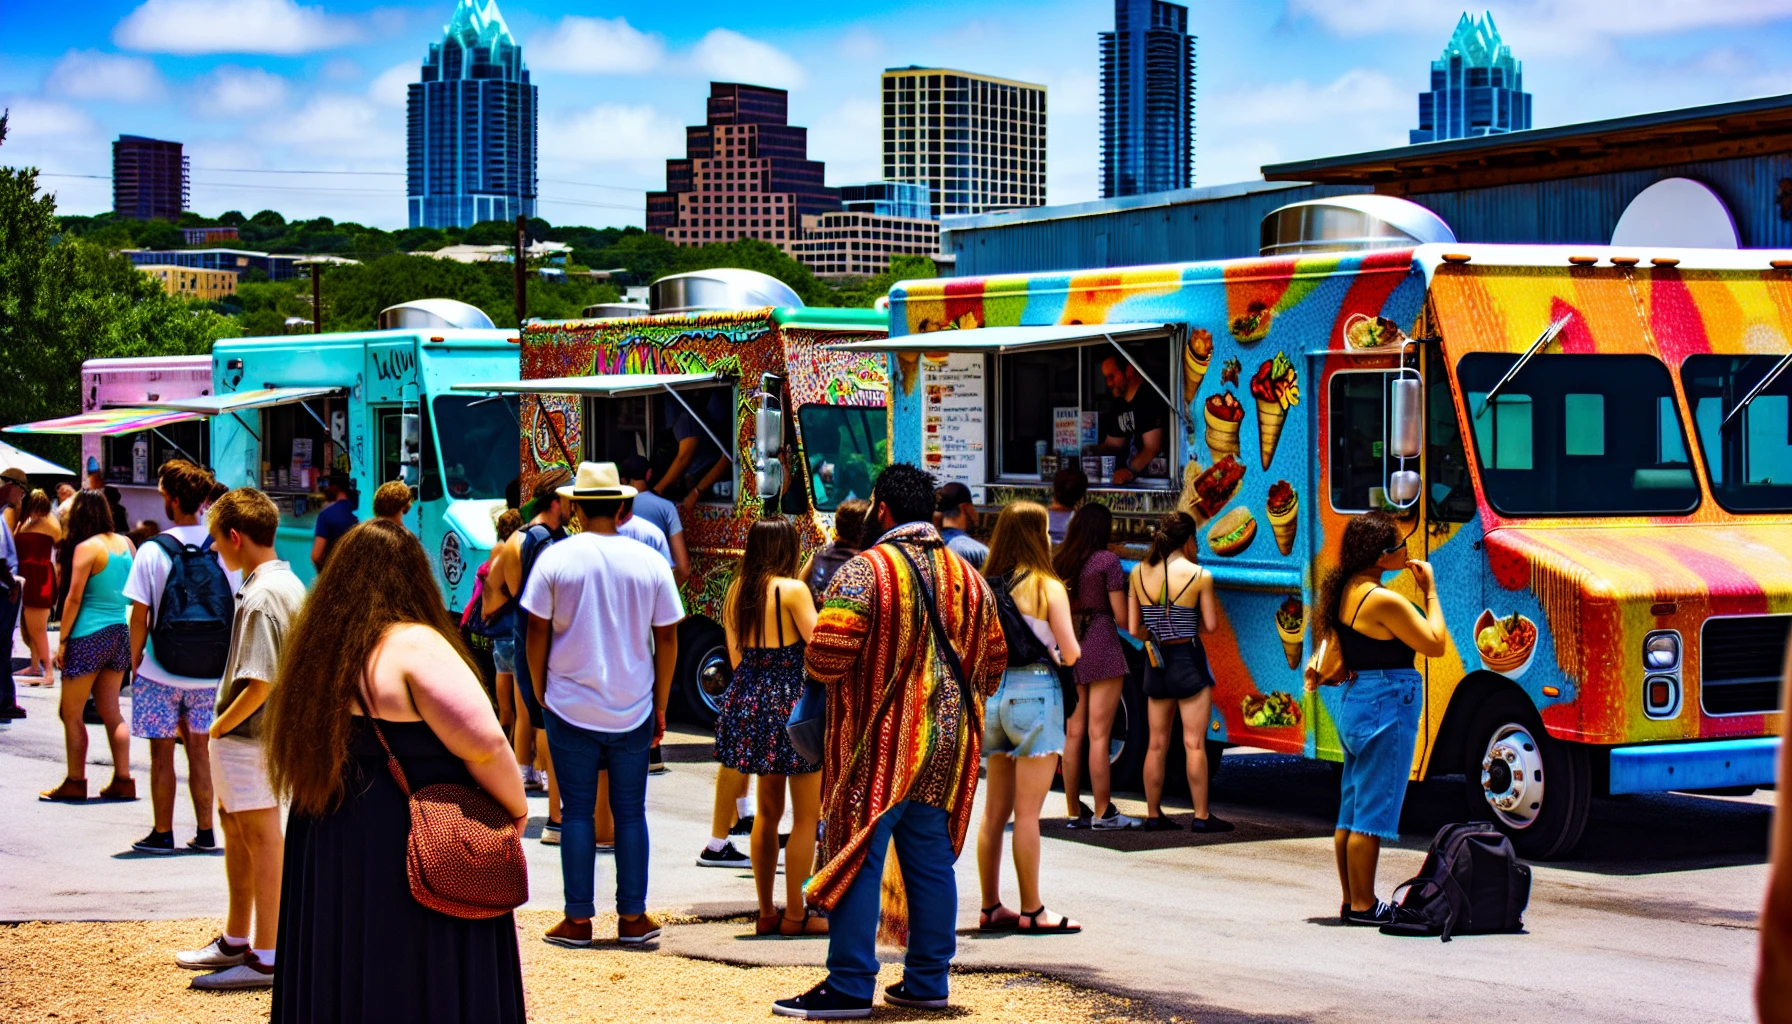 Colorful food trucks in Austin offering diverse culinary options - The truth about moving in Austin local insights and honest reviews